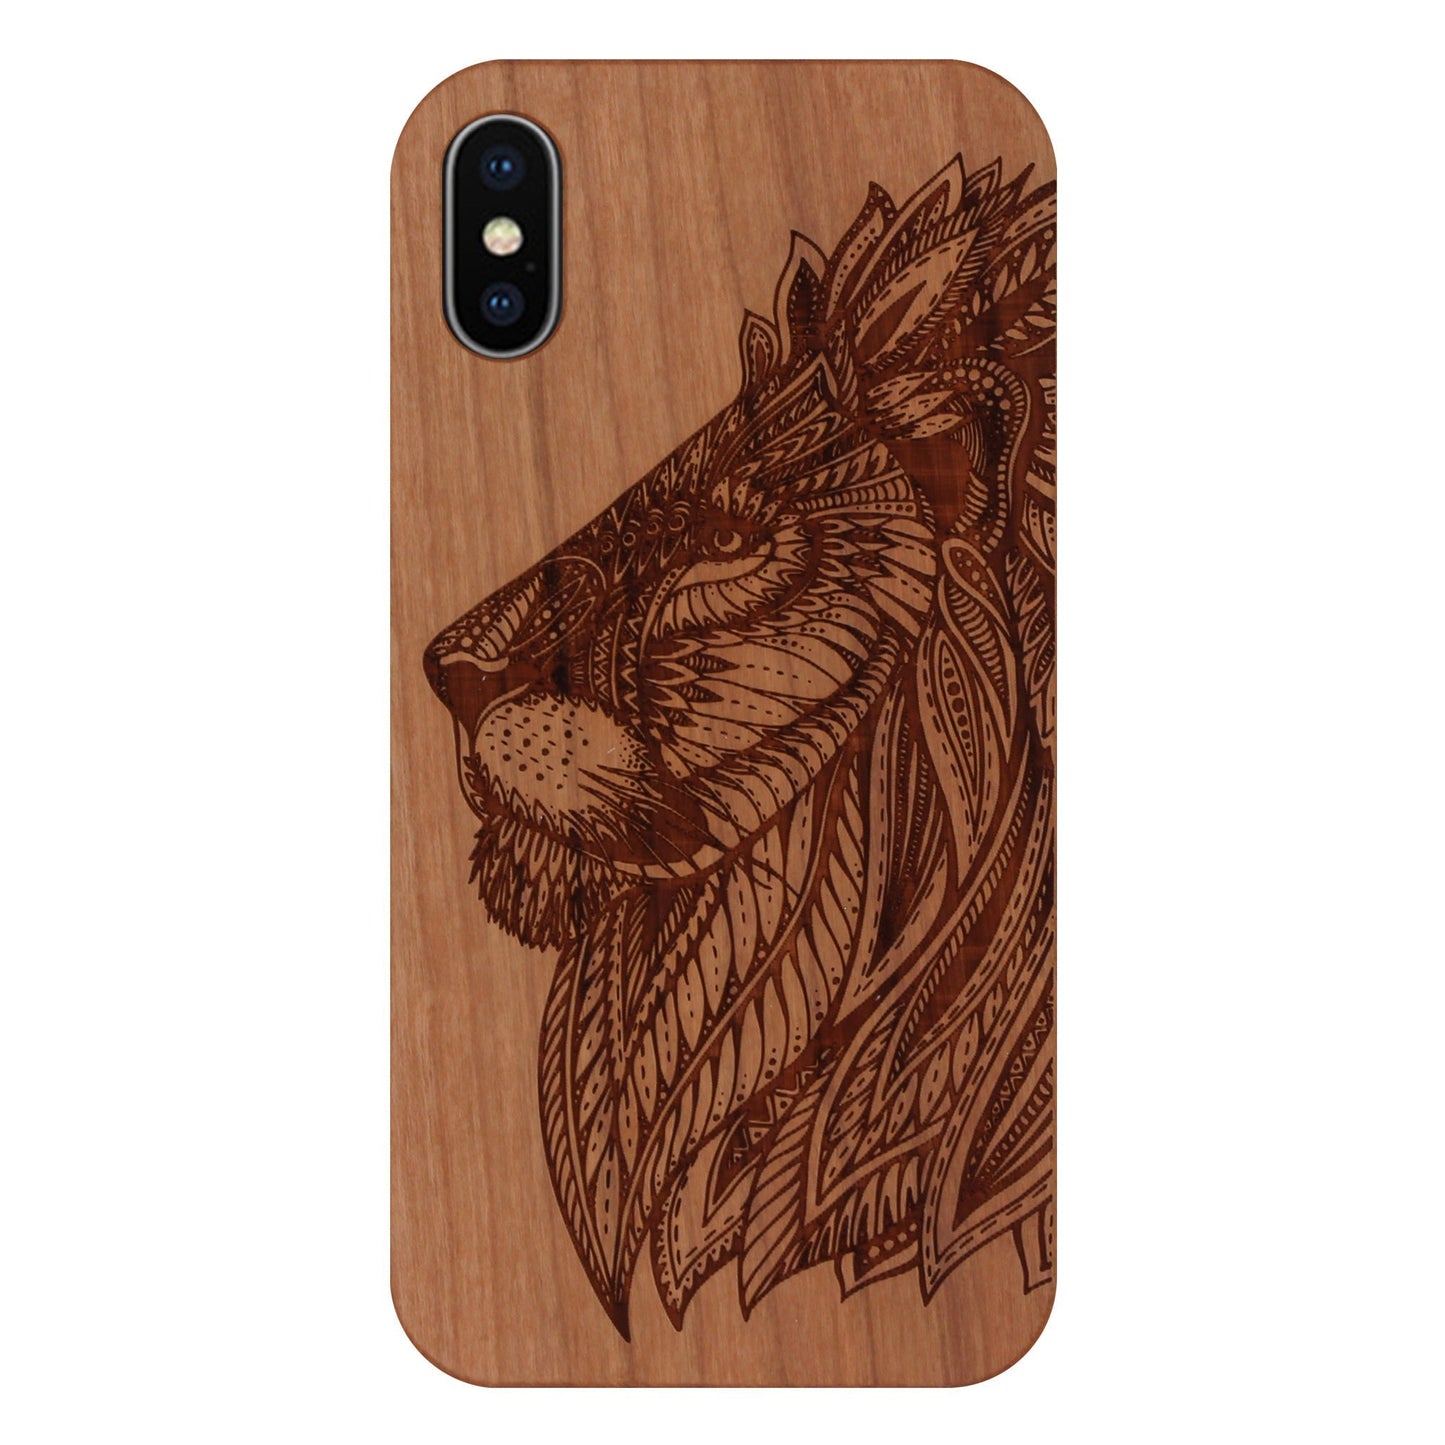 Cherry Wood Lion Eden Case for iPhone XS Max